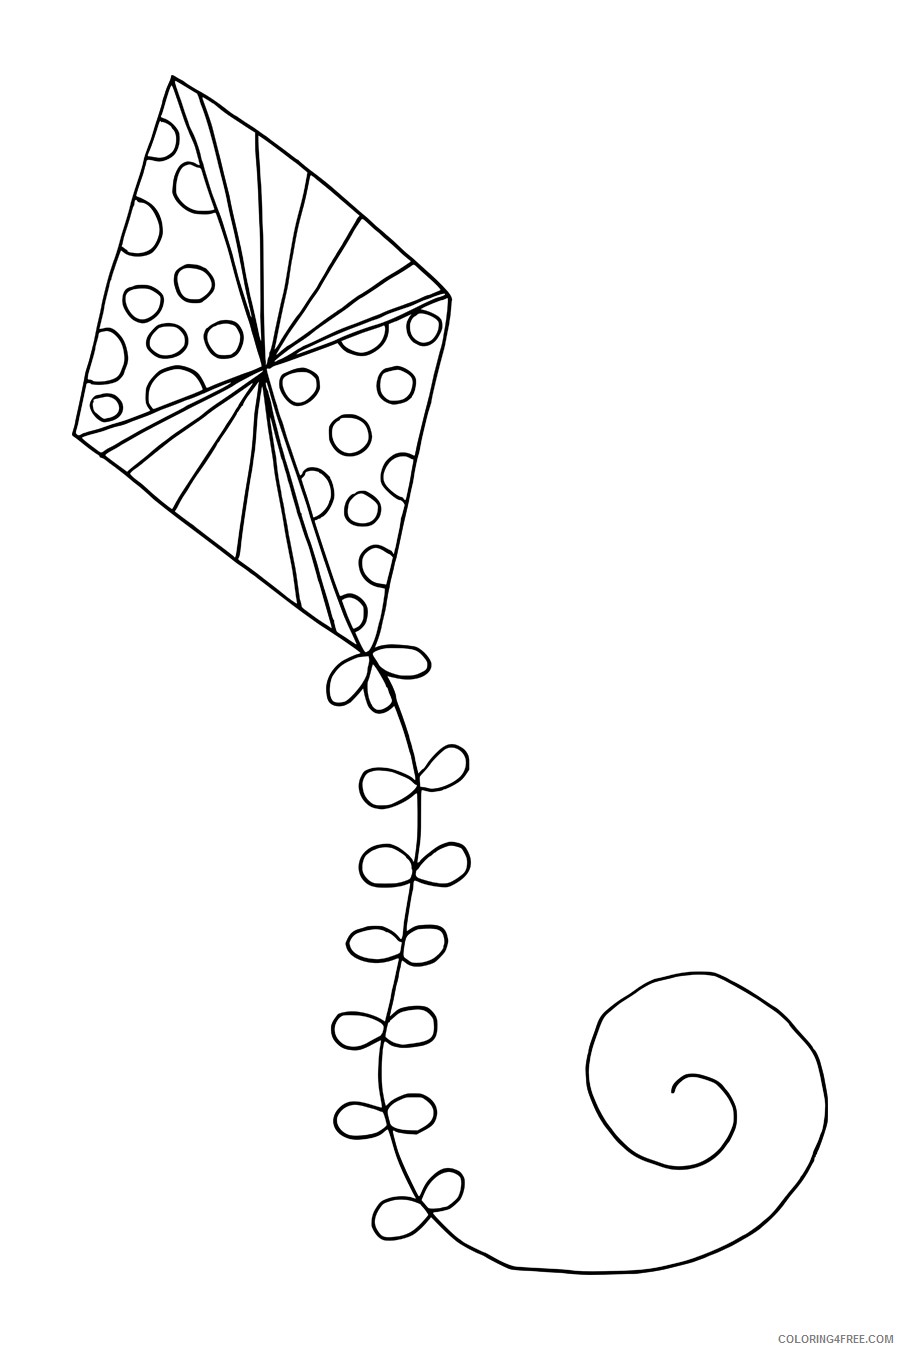 kite coloring pages for kids printable Coloring4free